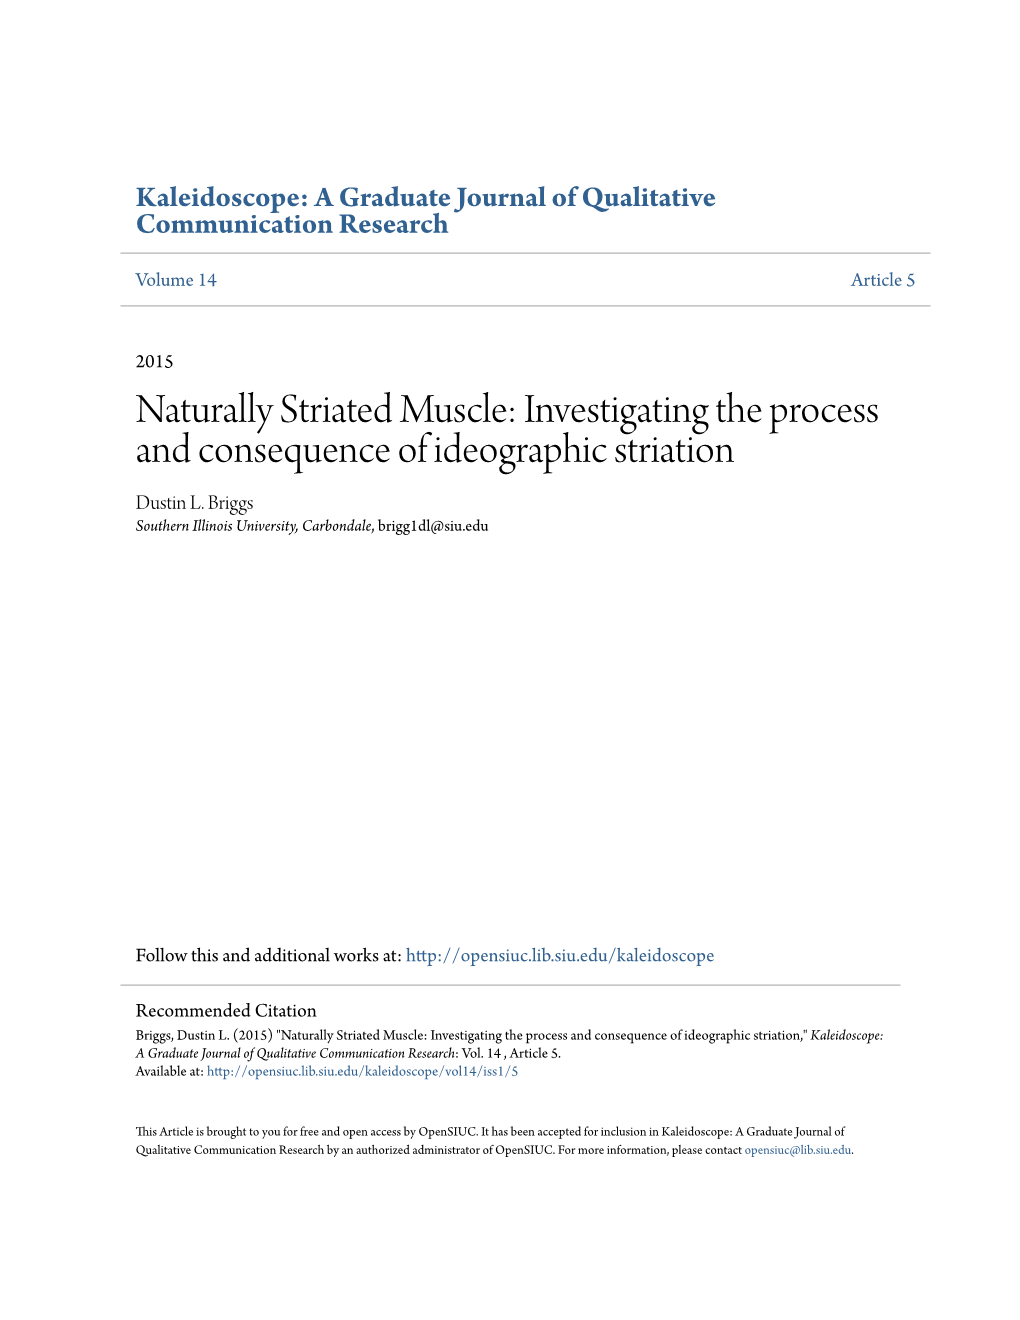 Naturally Striated Muscle: Investigating the Process and Consequence of Ideographic Striation Dustin L